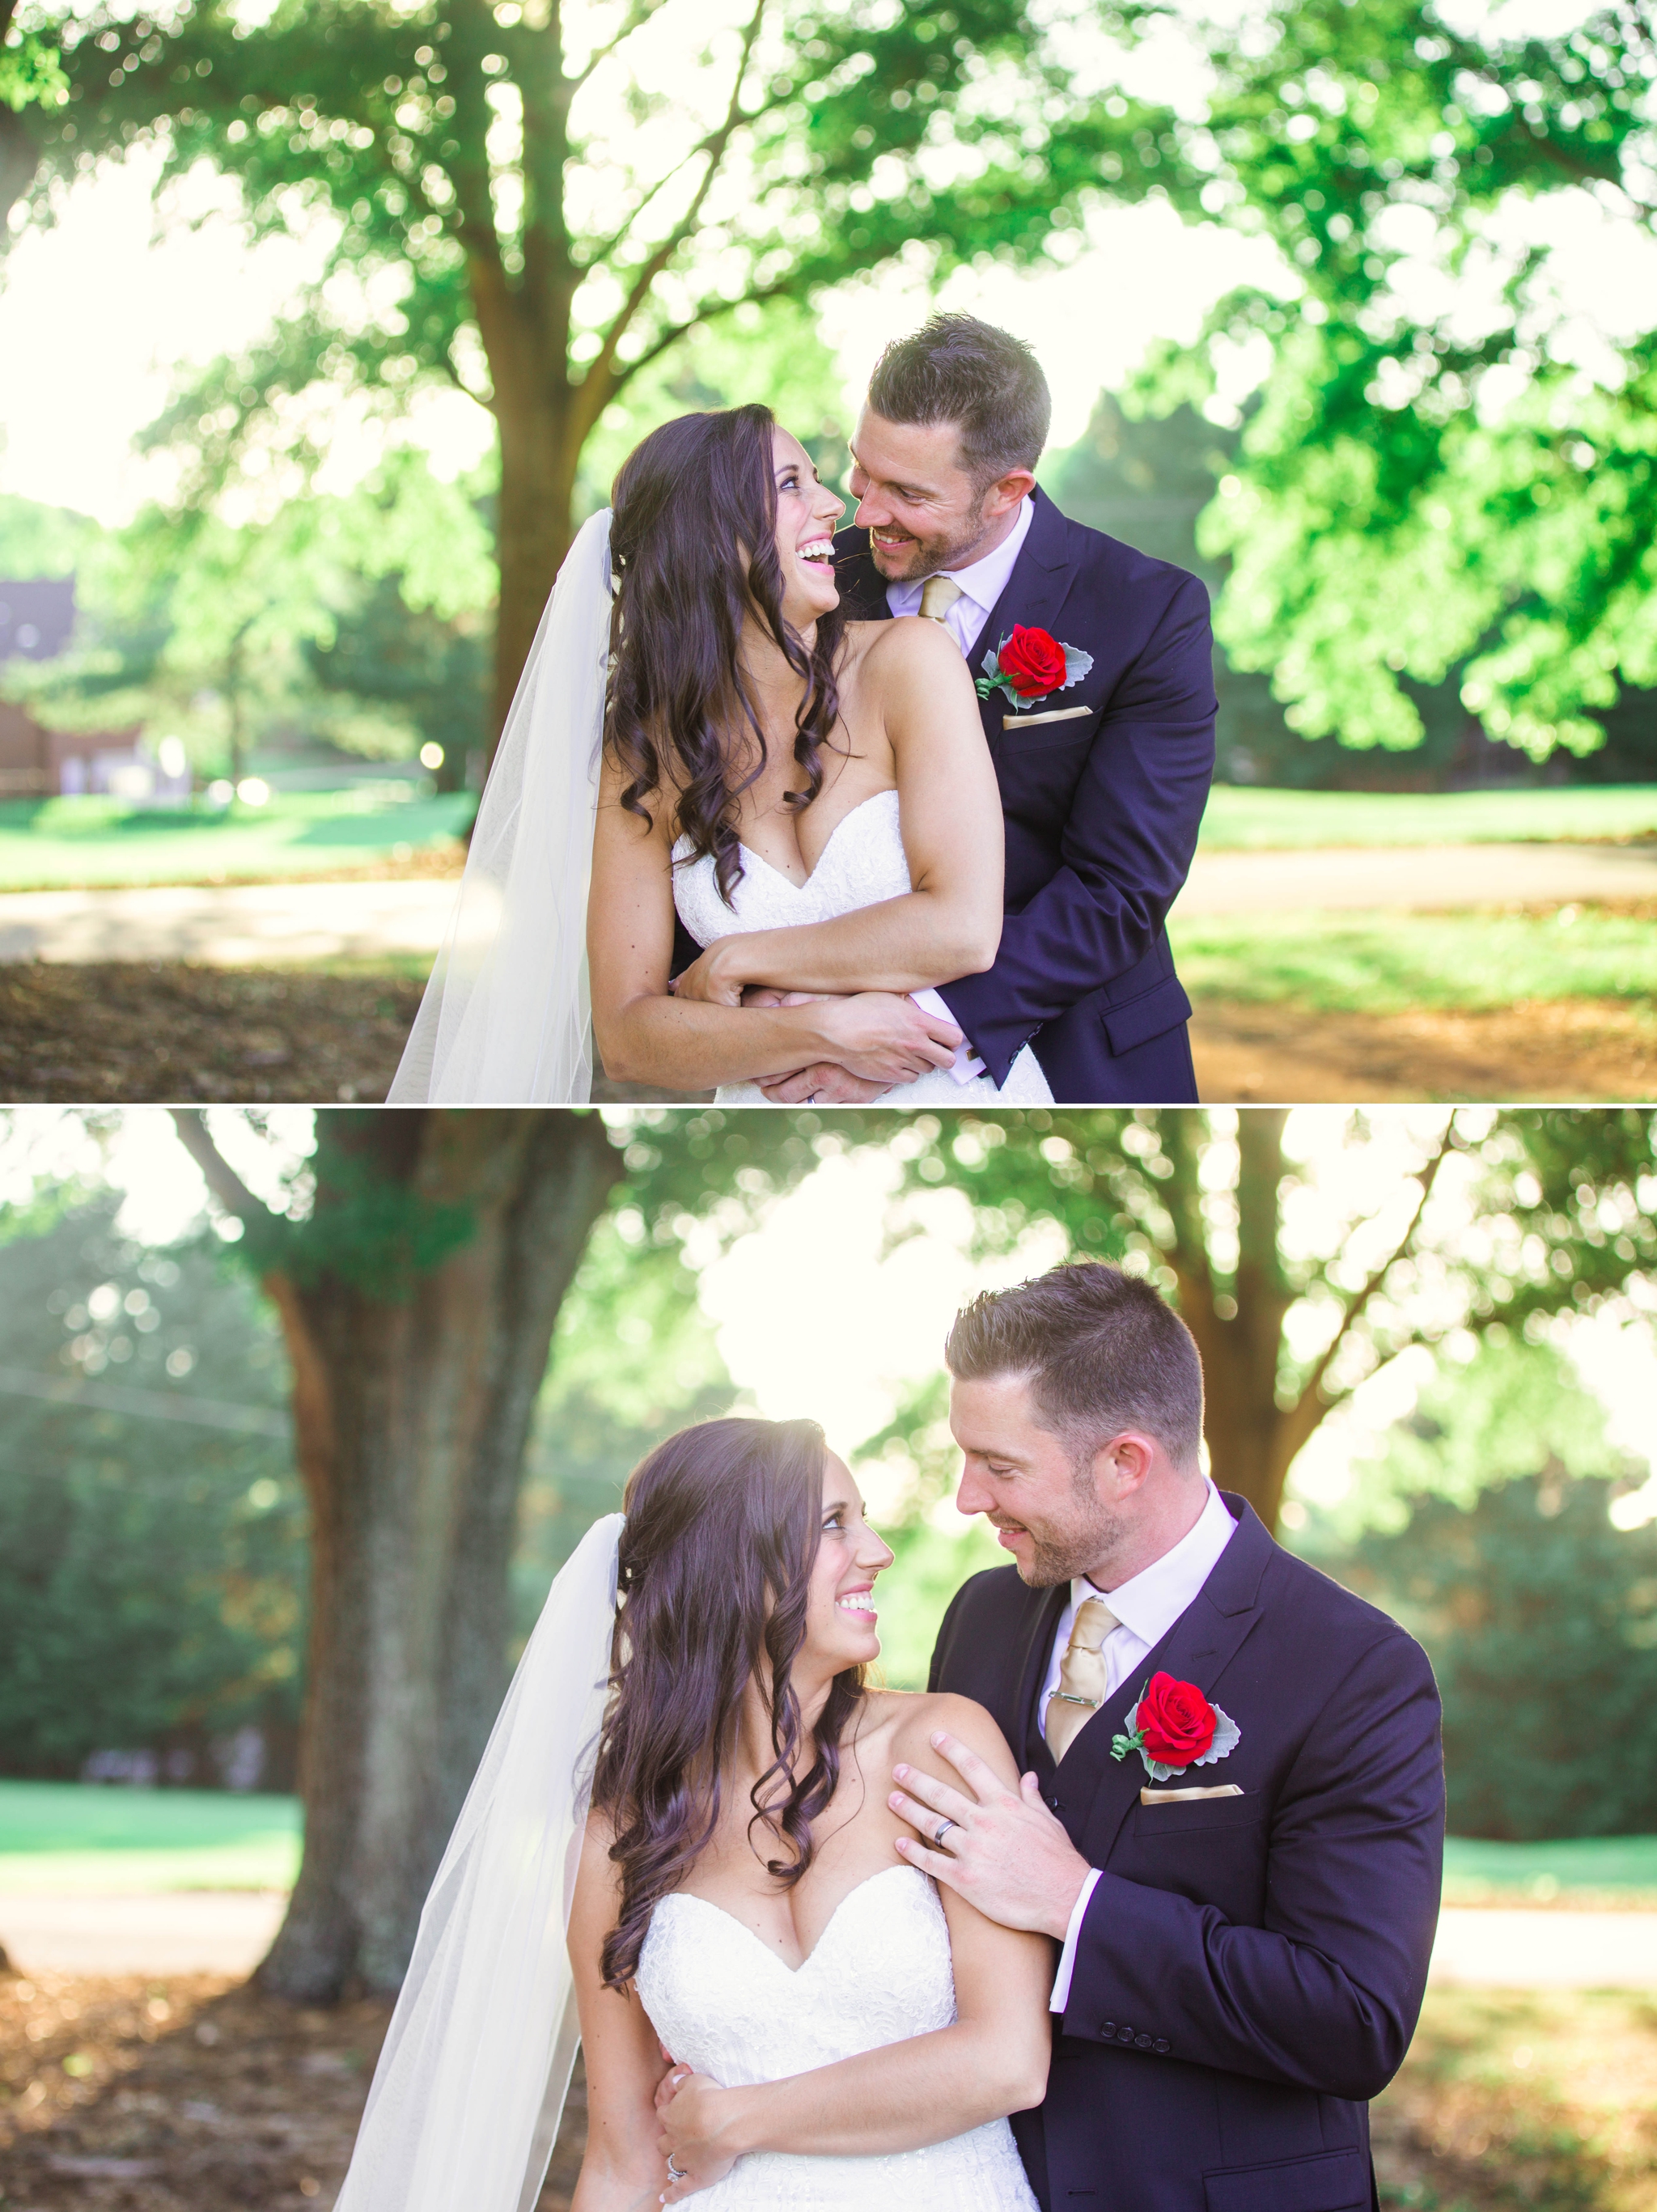 Wedding Photography at the Cabarrus Country Club in Concord NC - Charlotte North Carolina Photographer